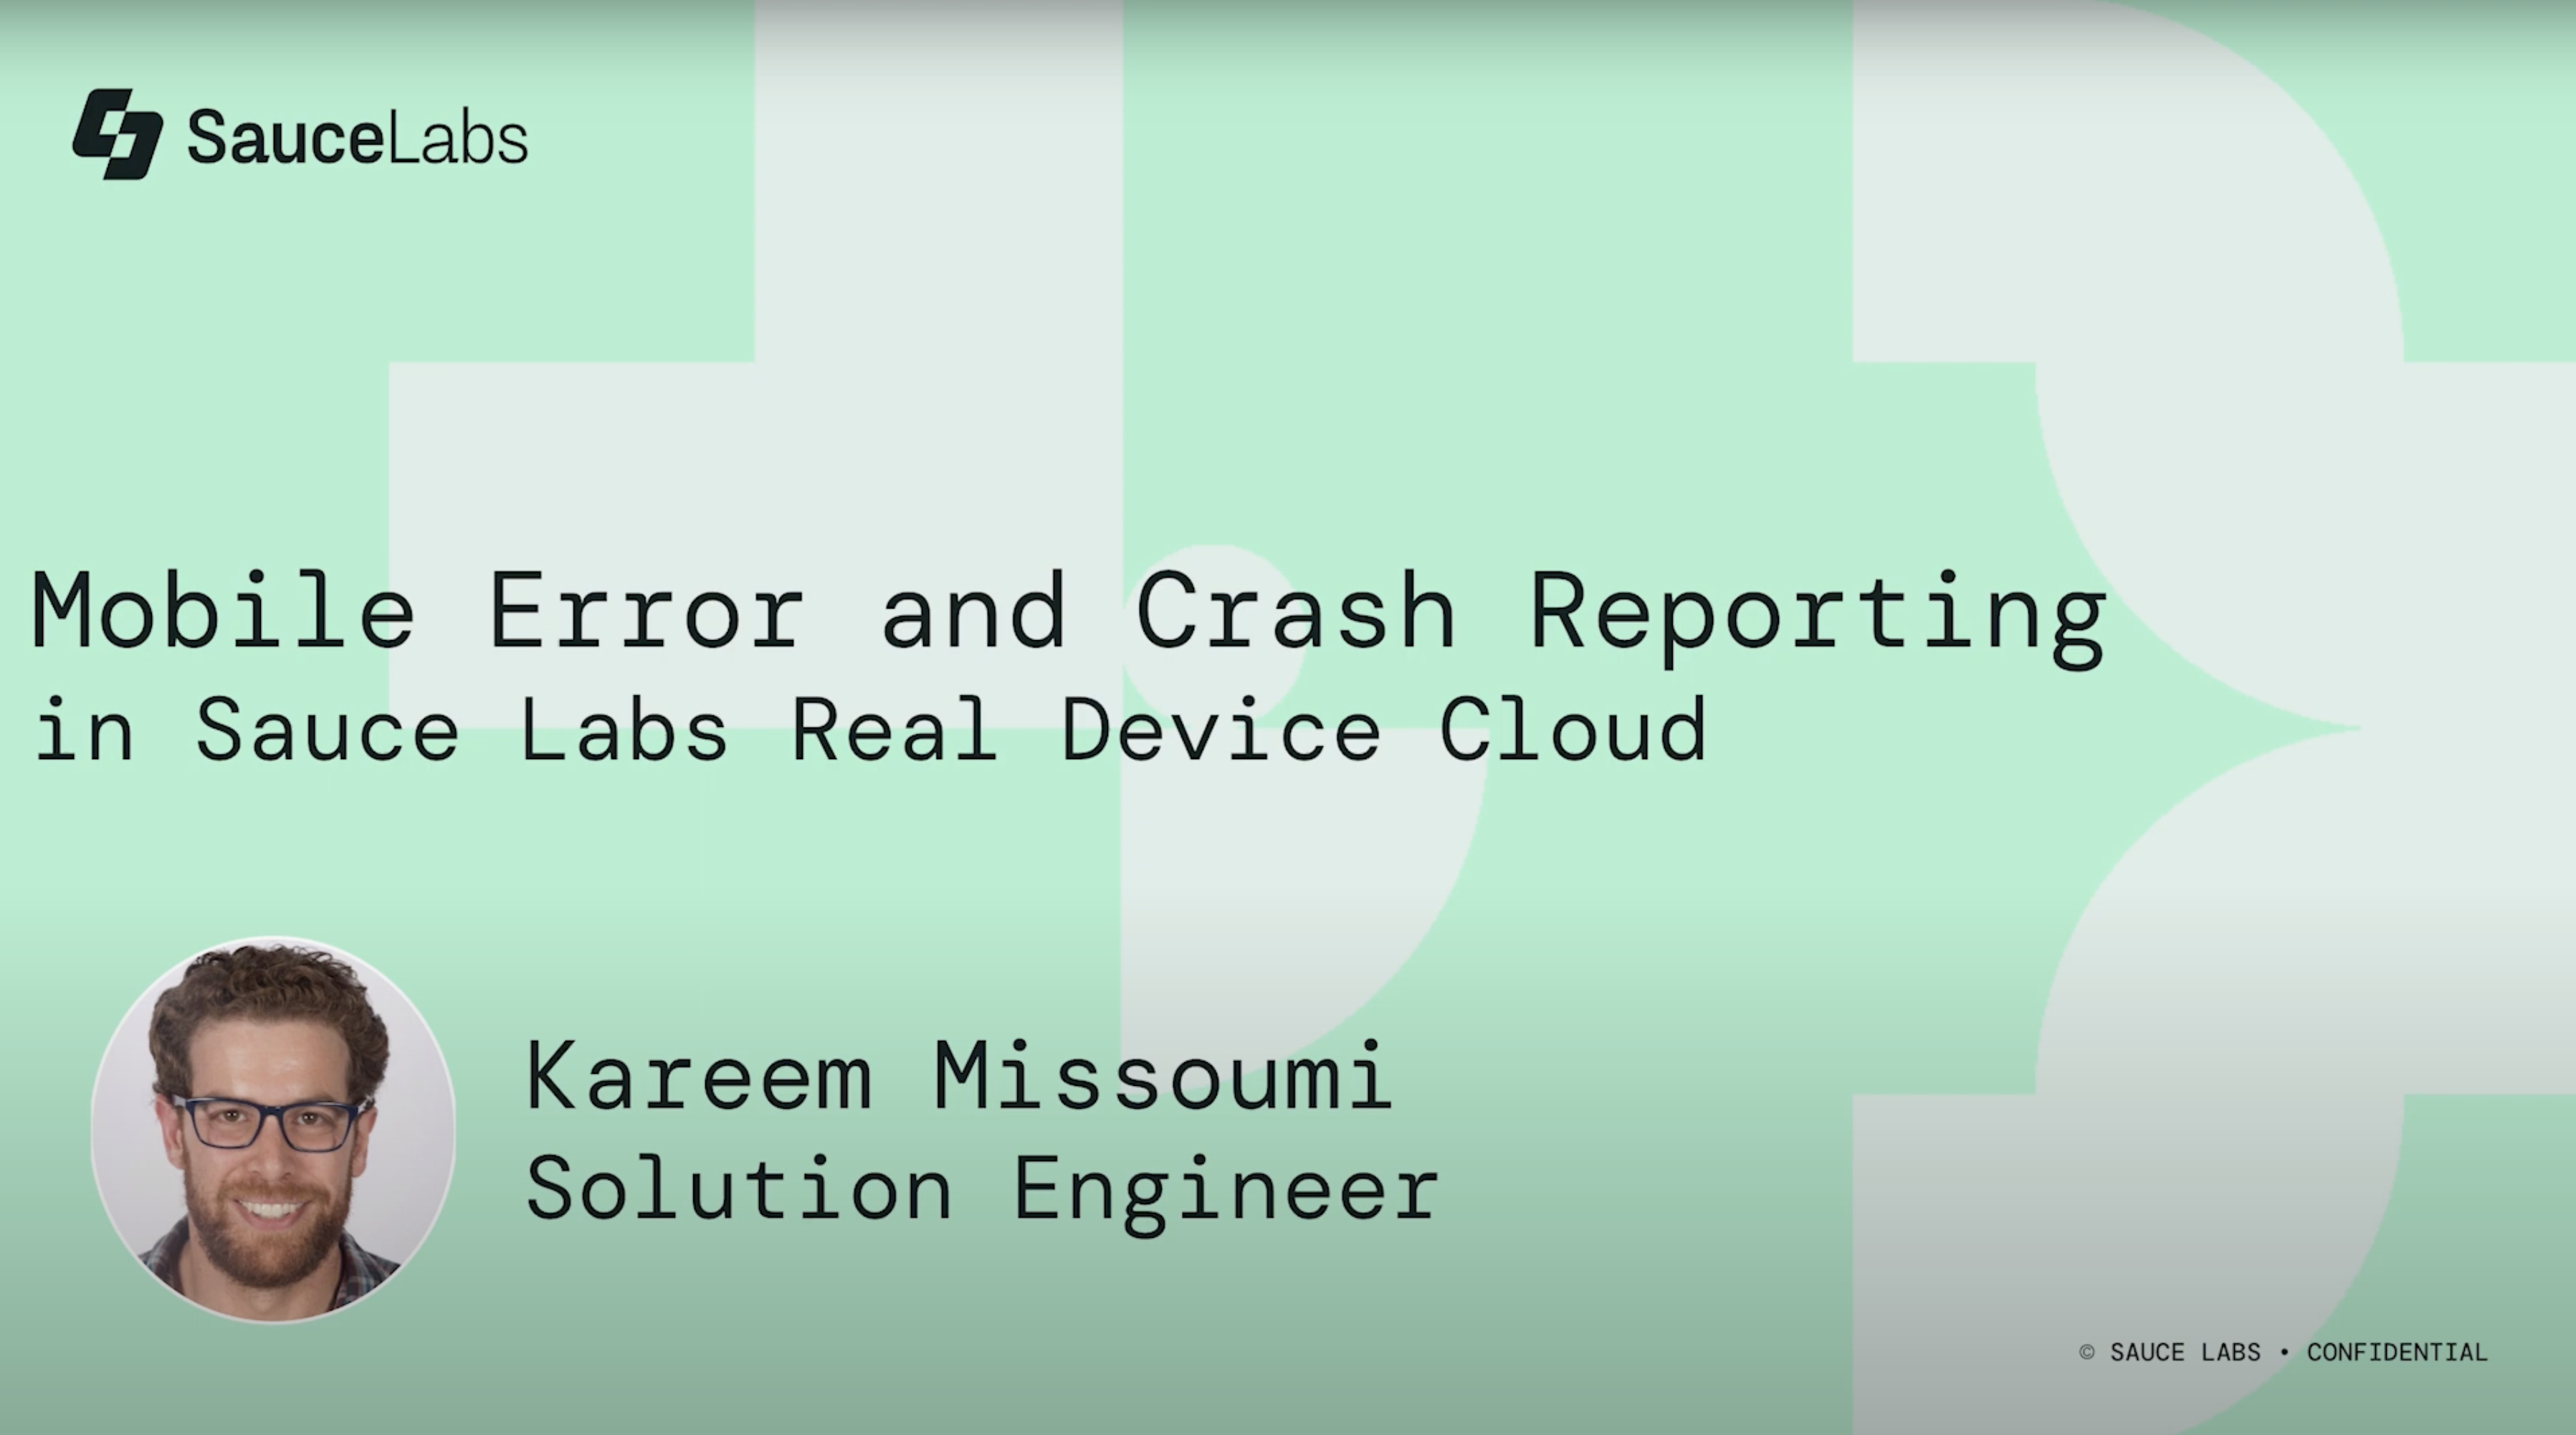 Mobile Error and Crash Reporting in Sauce Labs Real Device Cloud